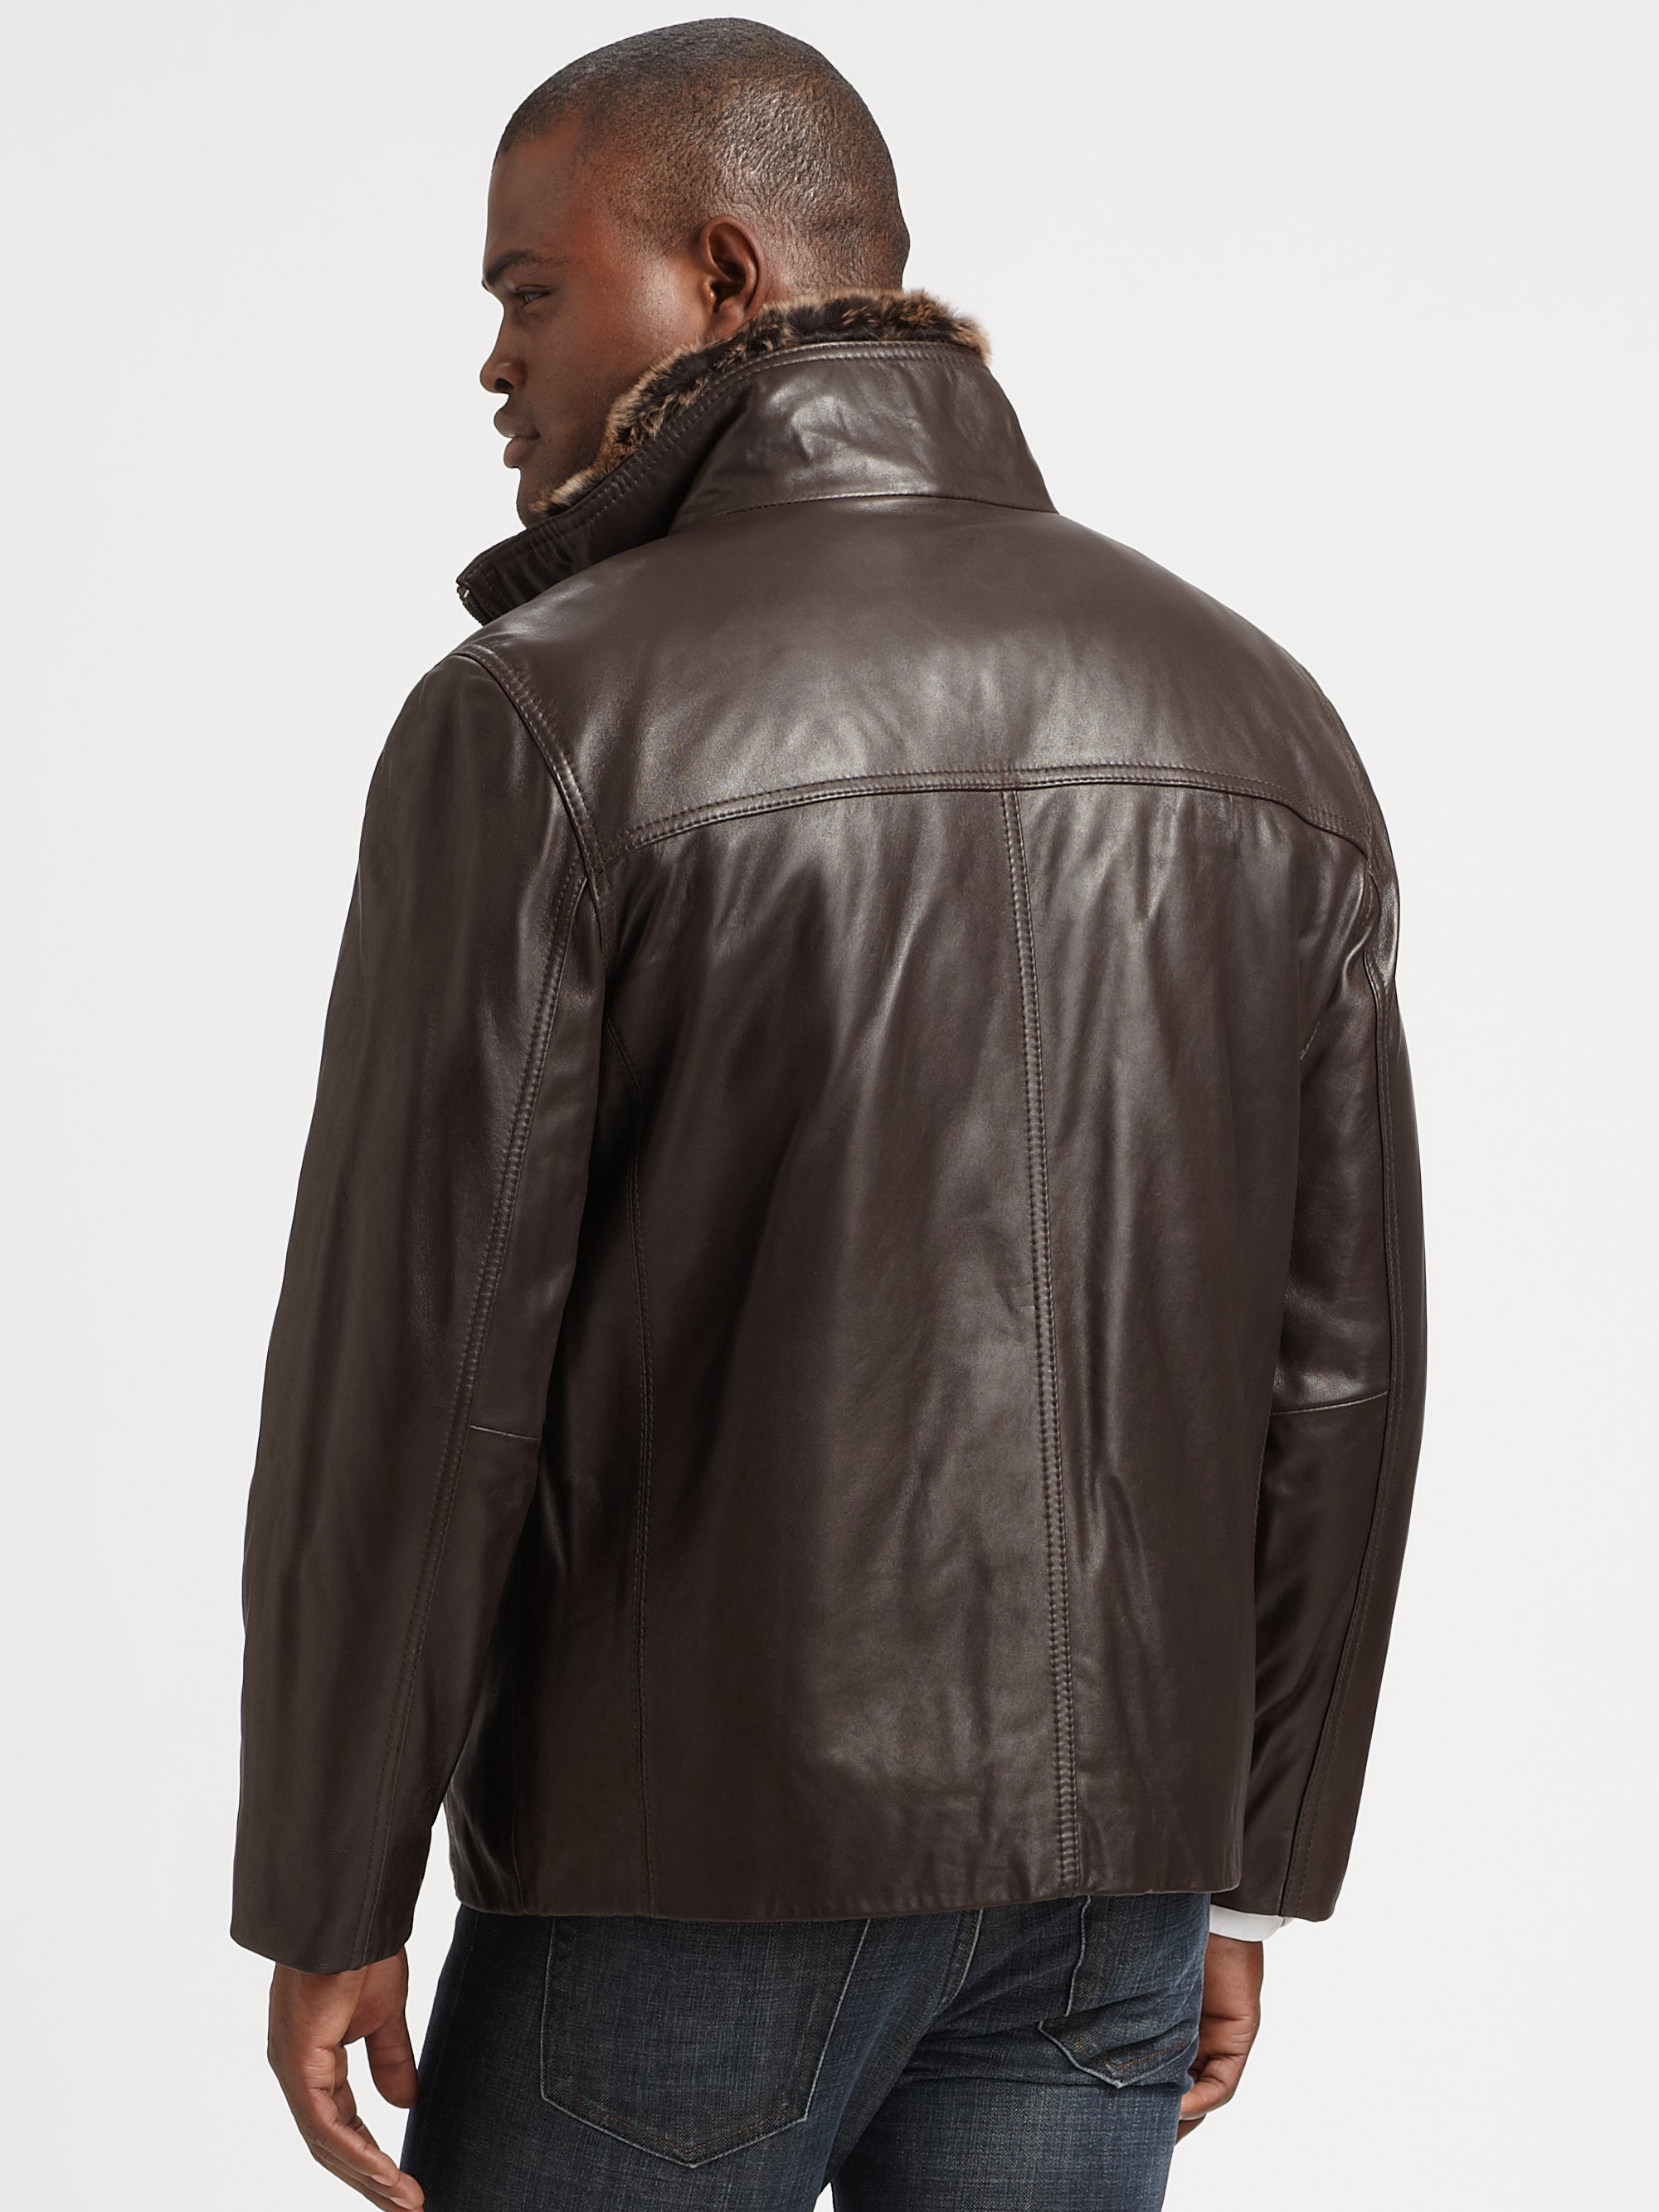 Andrew Marc Leather Jacket in Espresso (Brown) for Men - Lyst